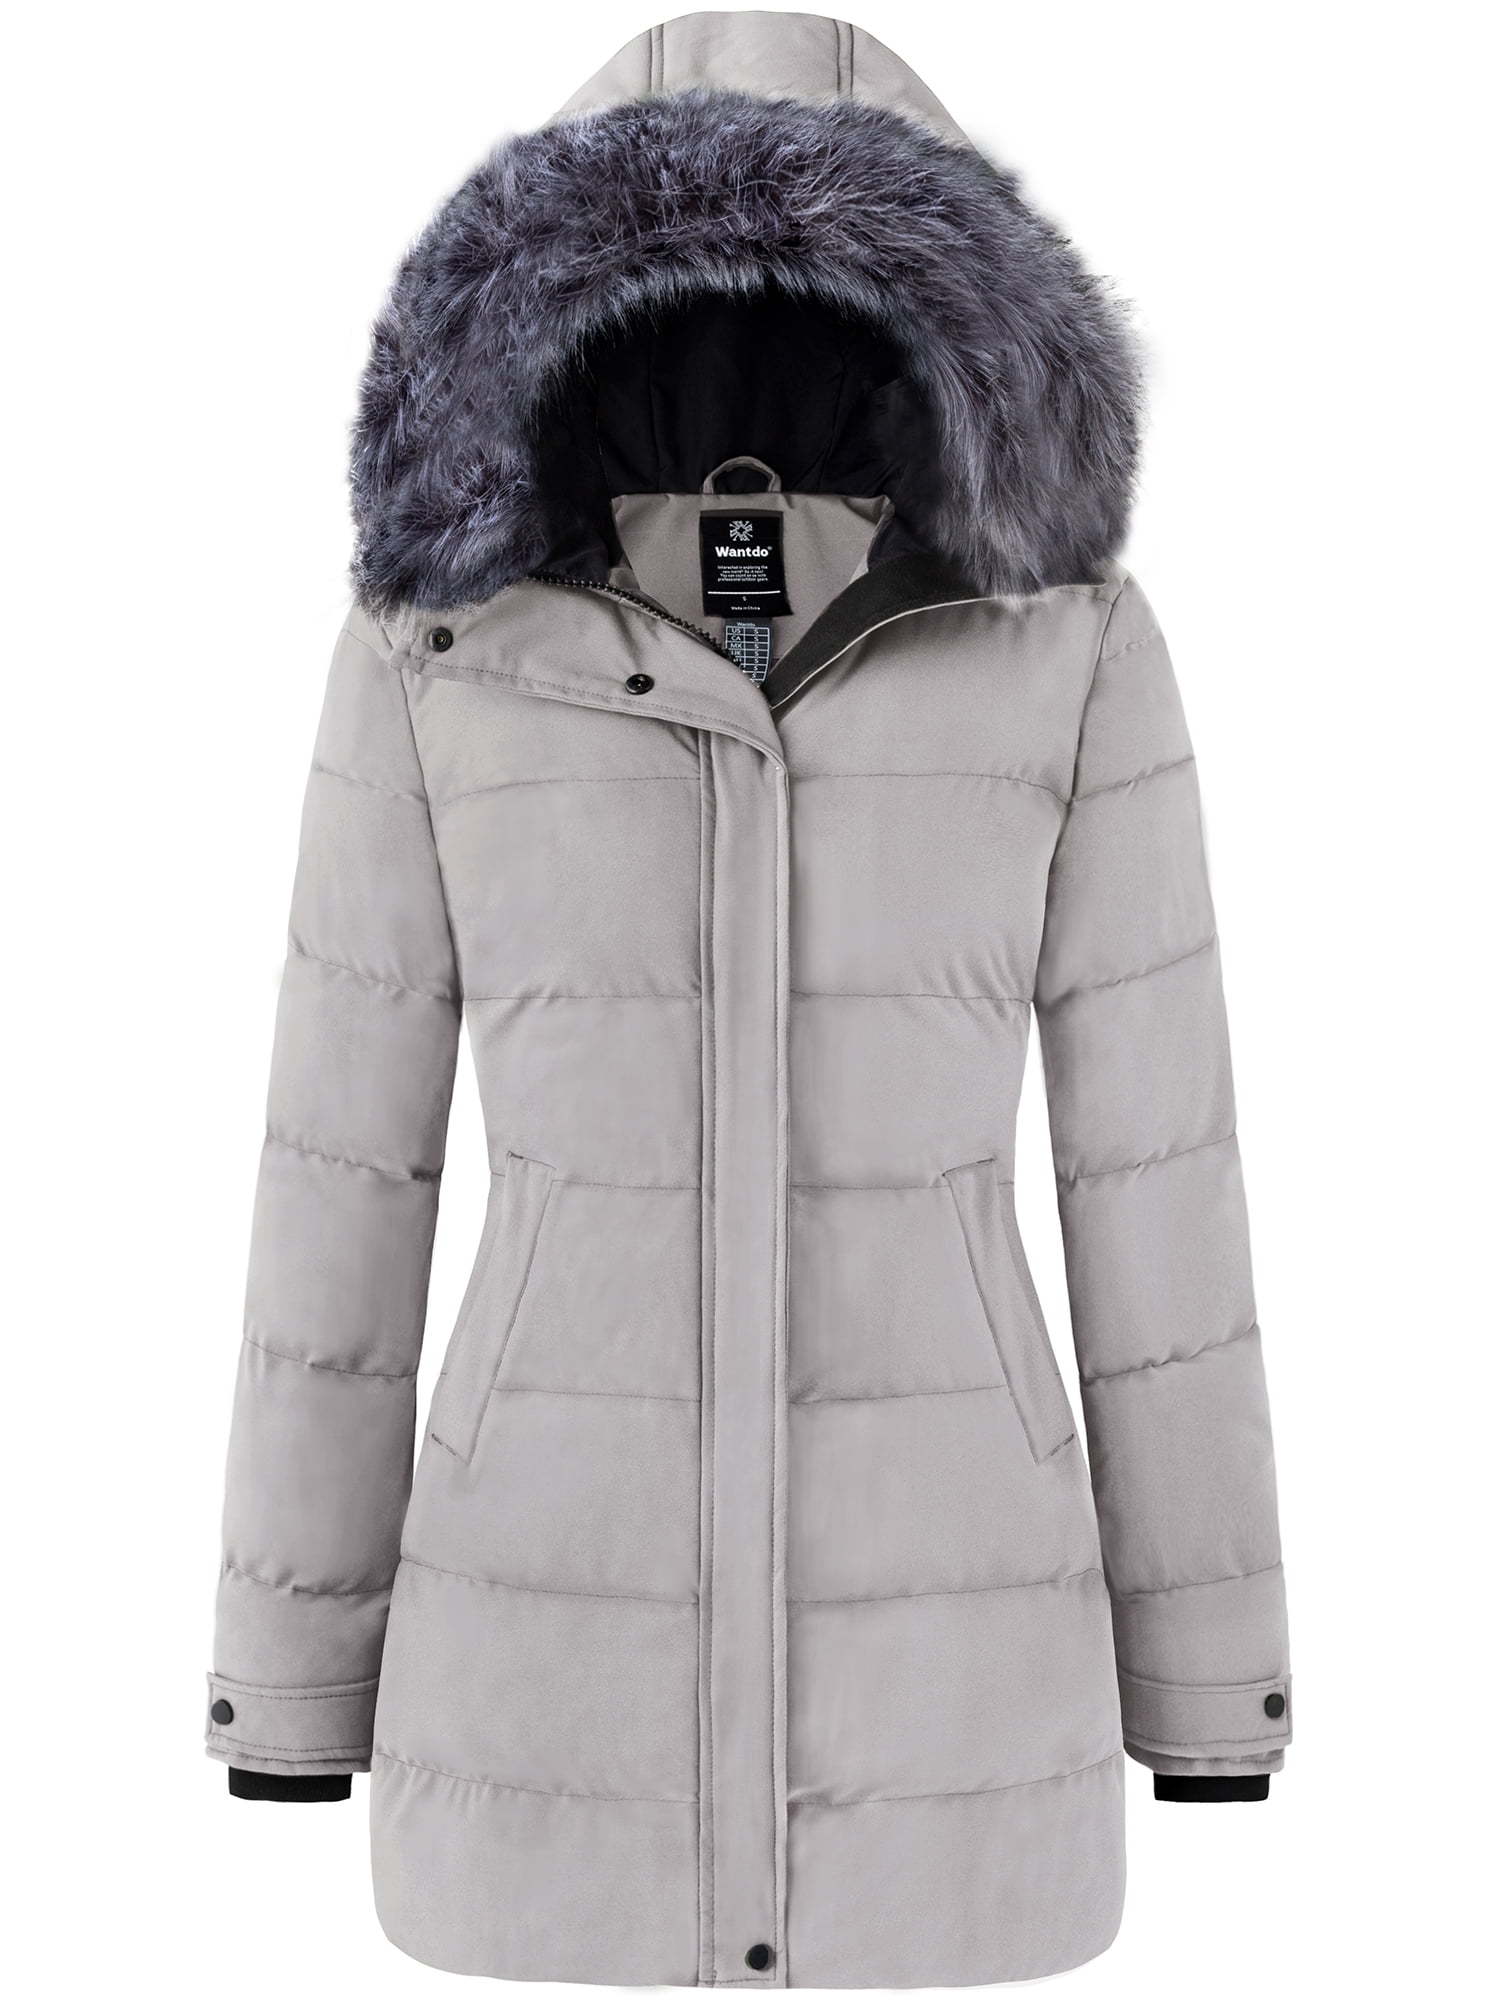 Wantdo Women's Puffer Jacket Thickened Winter Coat Parka Coat with ...